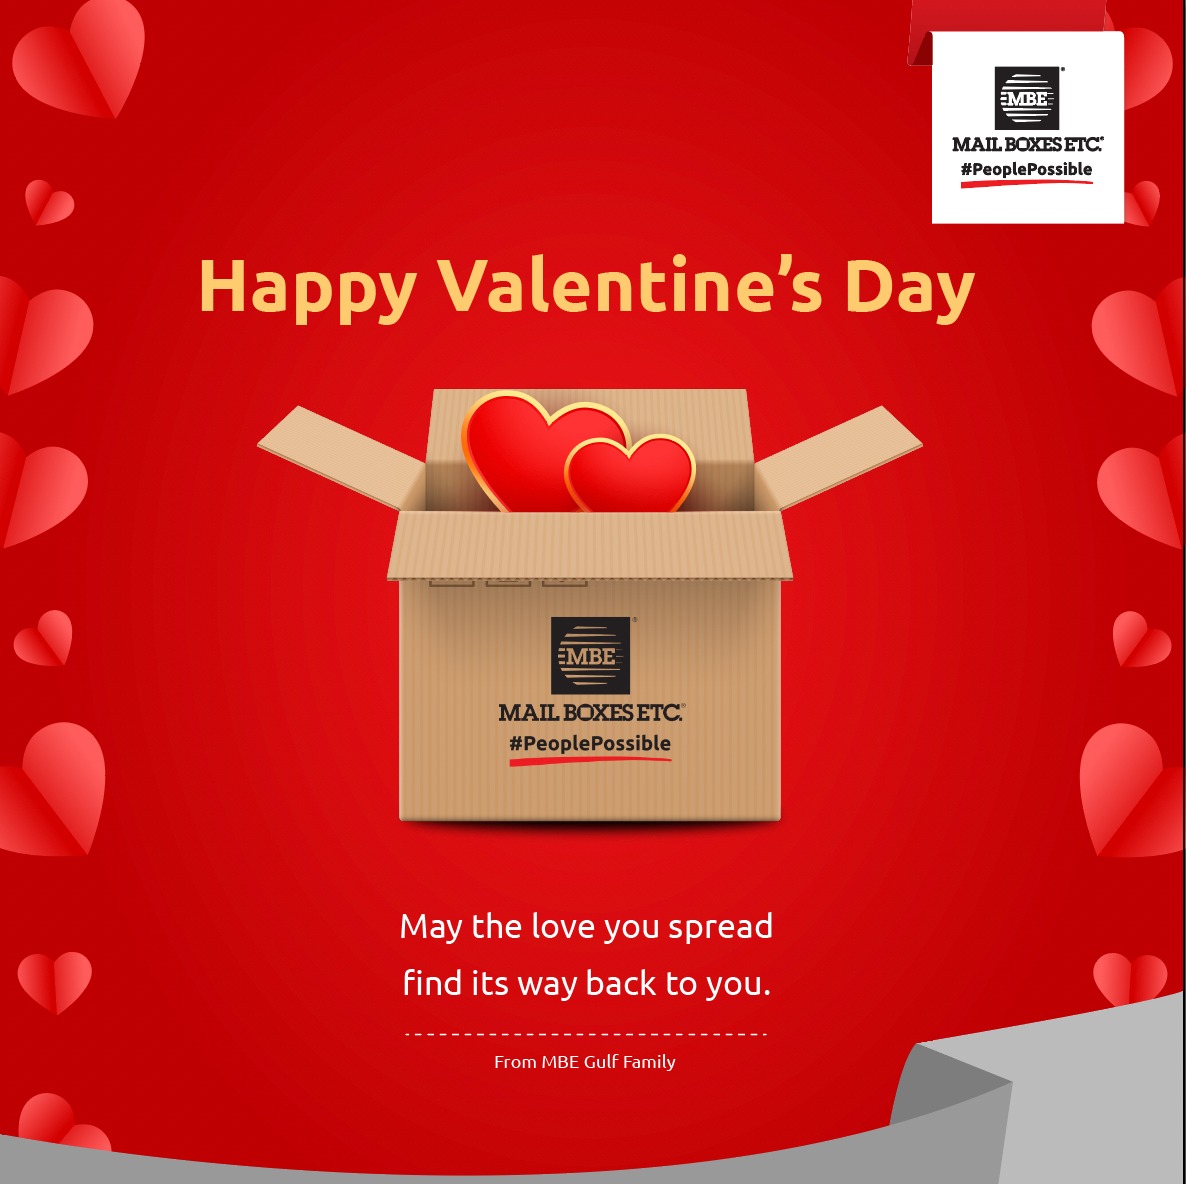 Happy Valentine’s Day!
Use MBE to shorten distances between you and your loved ones by sending your emotions 🥰😍😘 using our pack and ship services in #Dubai and #UAE.
#PeoplePossible #MailBoxesEtc #MBEGulf